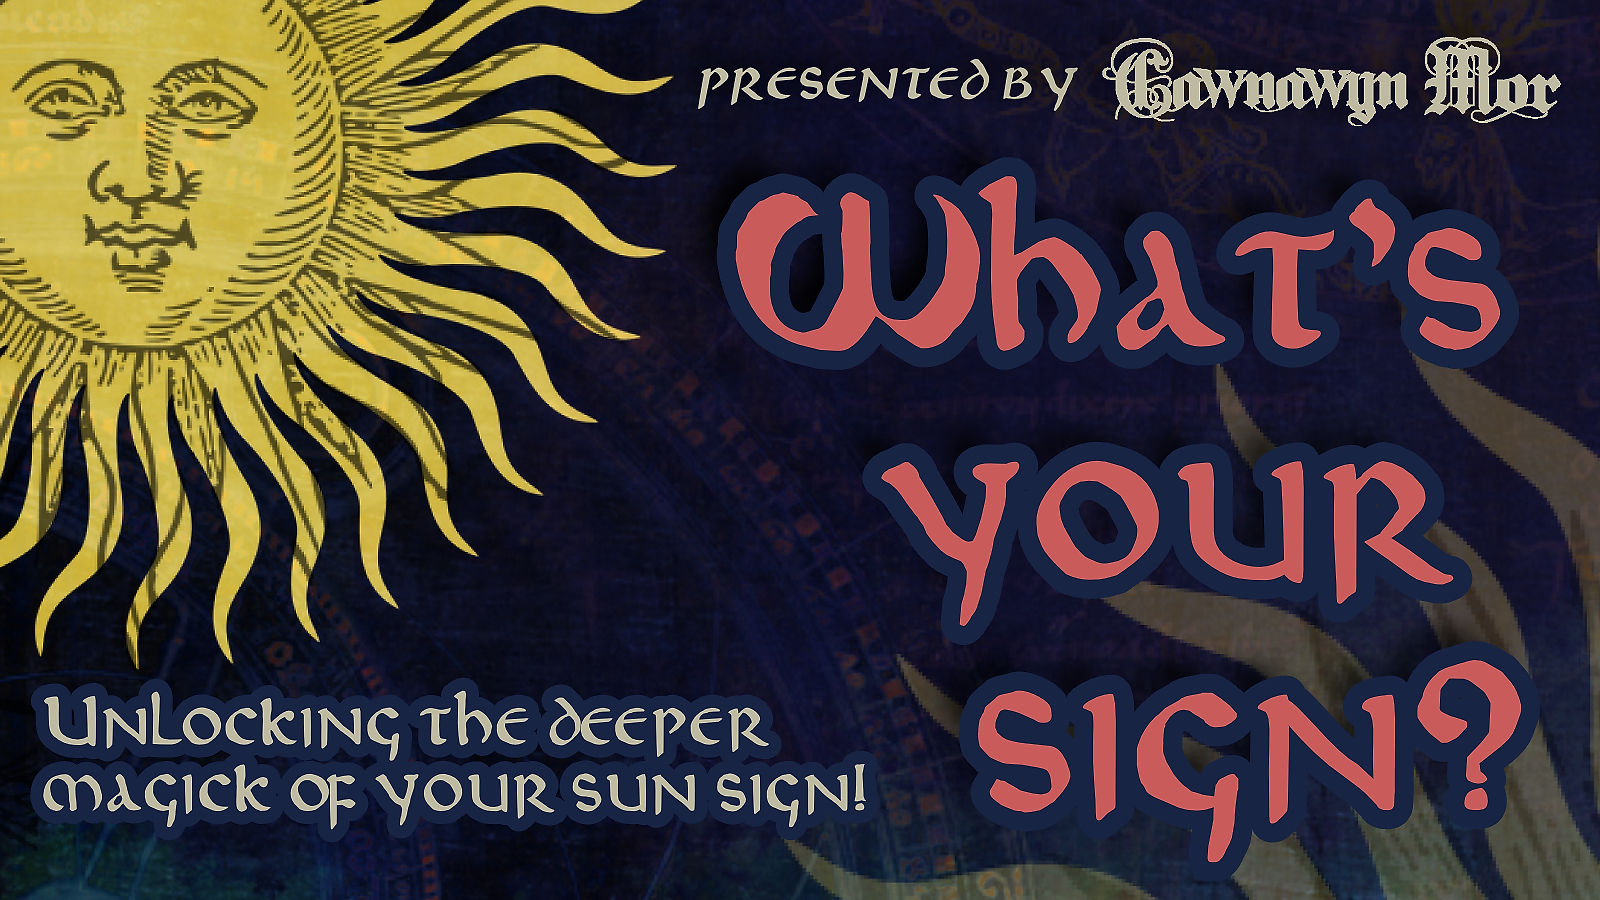 "What's Your Sign?" | Unlocking the Deeper Magick of Your Sun Sign